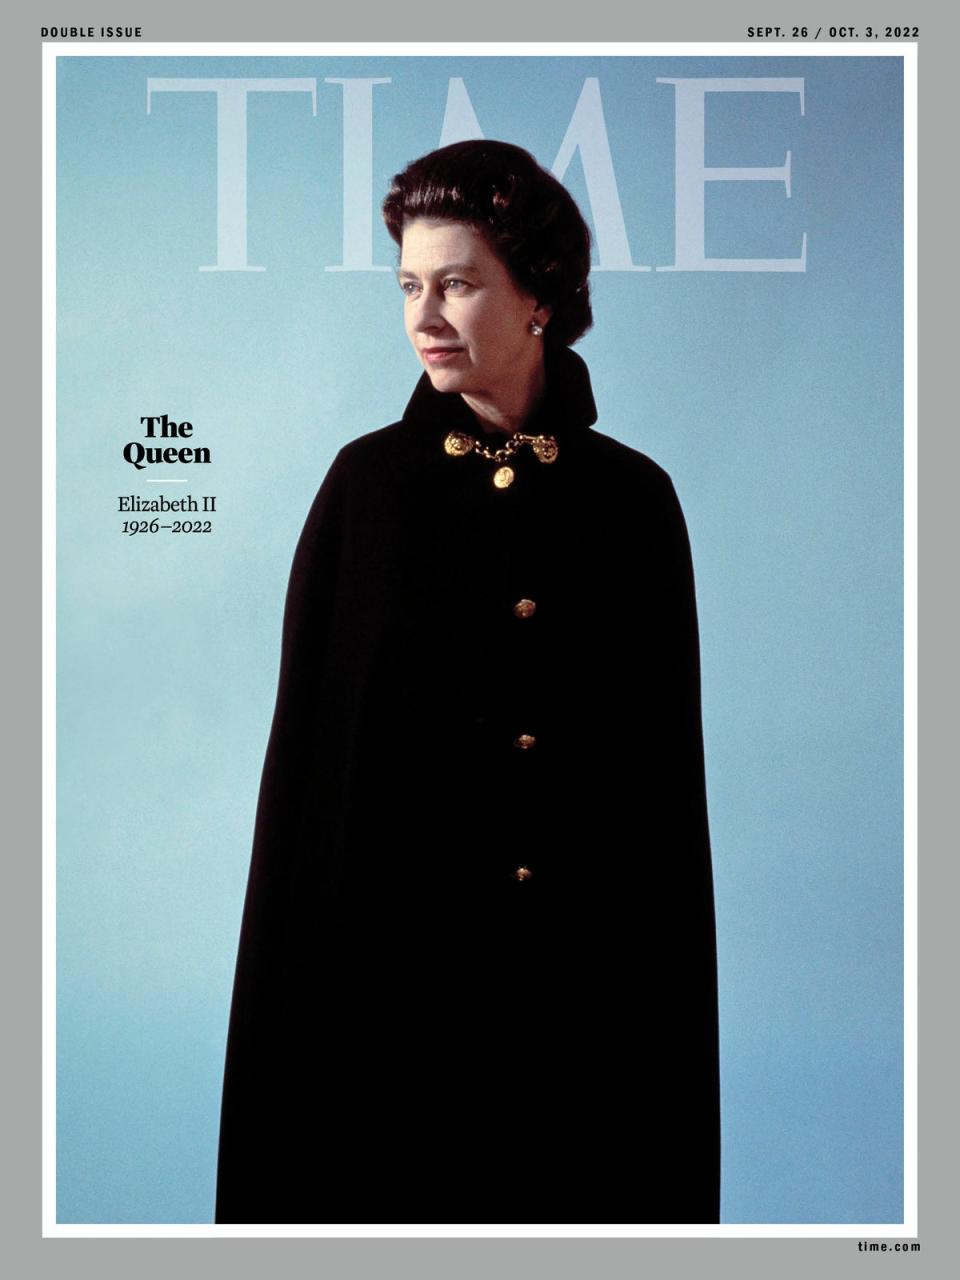 Time magazine honours Queen Elizabeth II with commemorative cover (Time magazine)